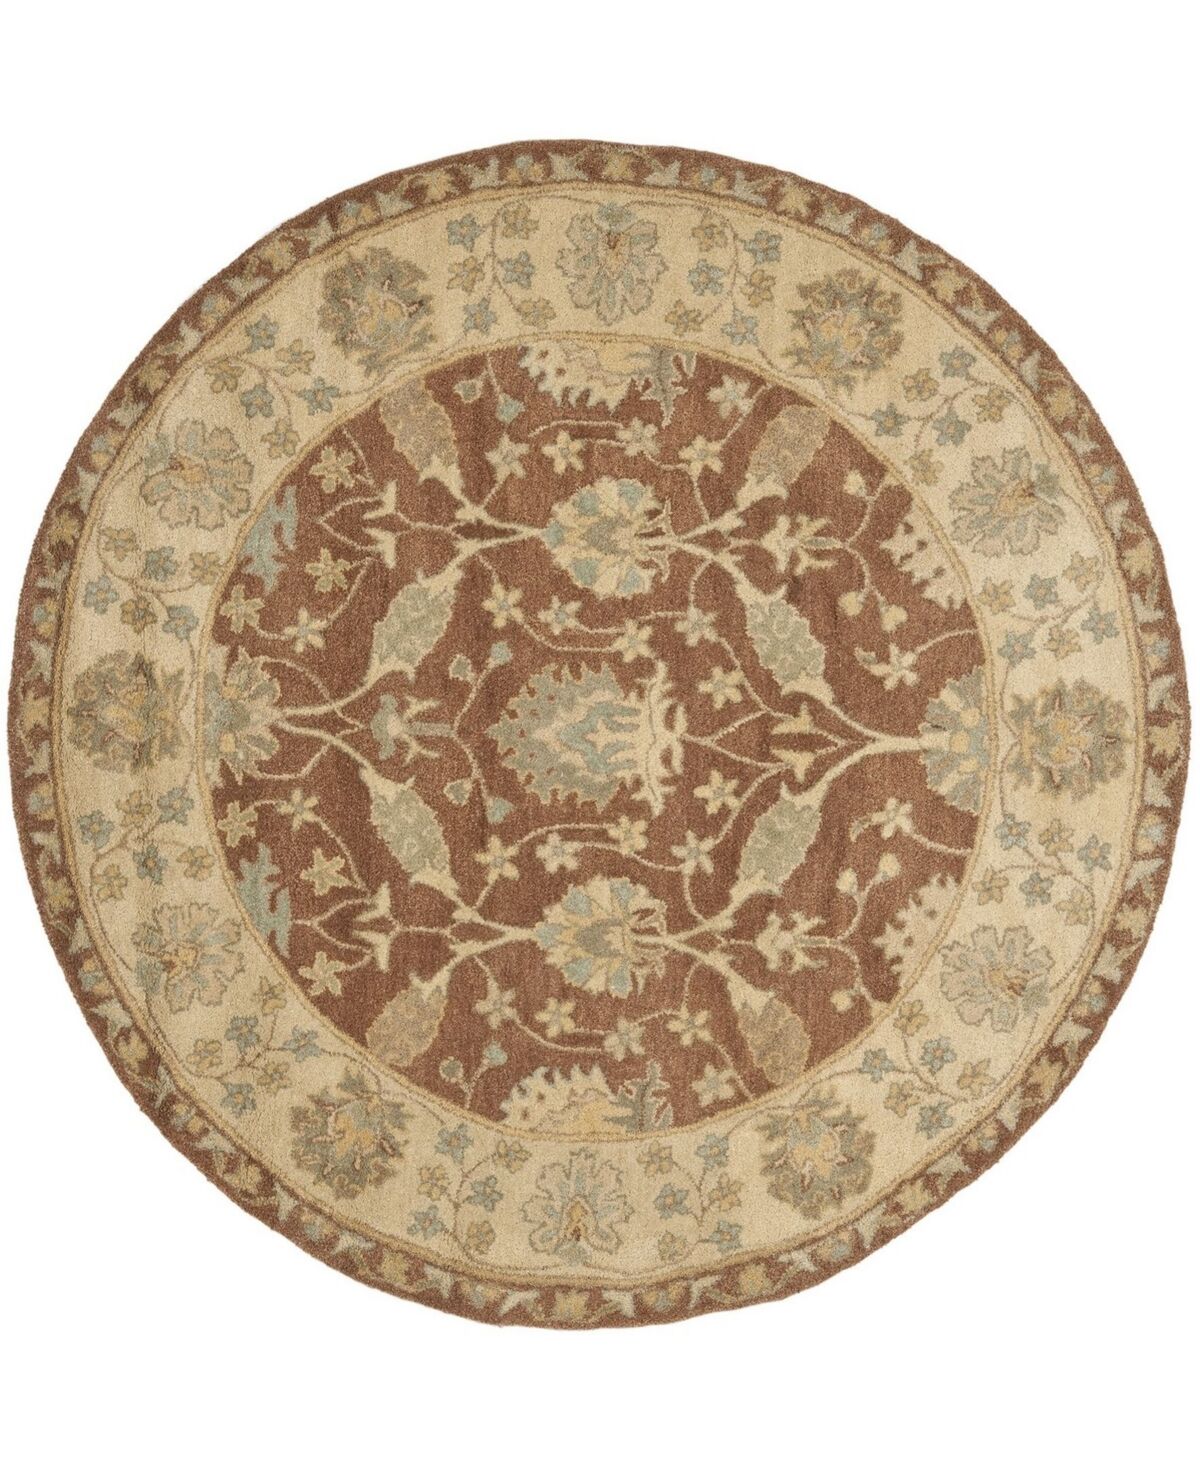 Safavieh Antiquity At315 Brown 8' x 8' Round Area Rug - Brown